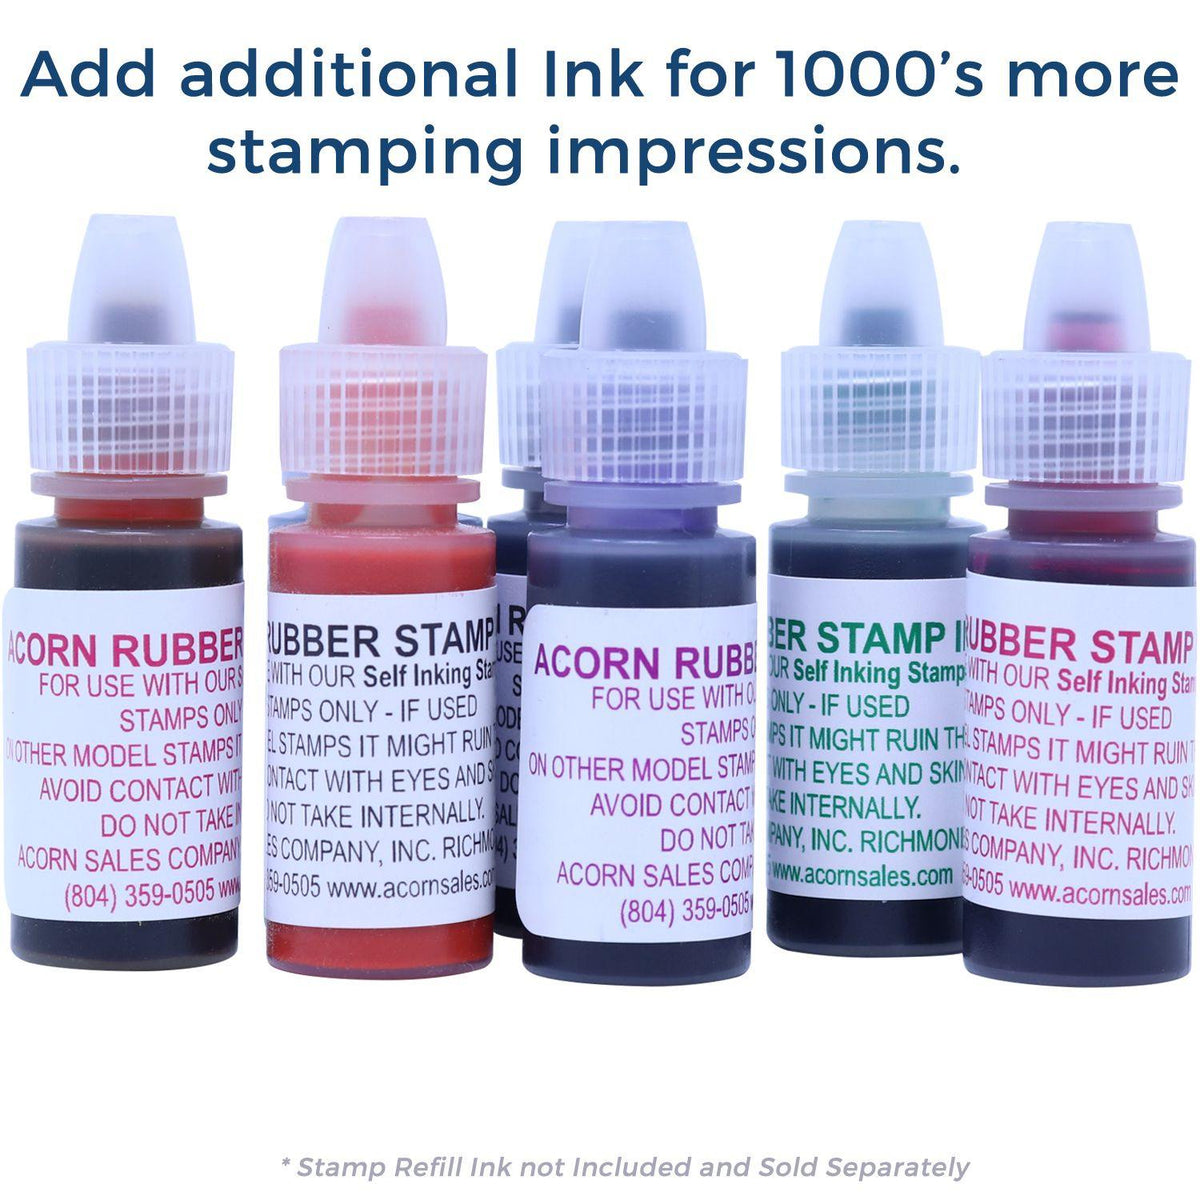 Refill Inks for Large Pre-Inked Orig1nal Stamp Available